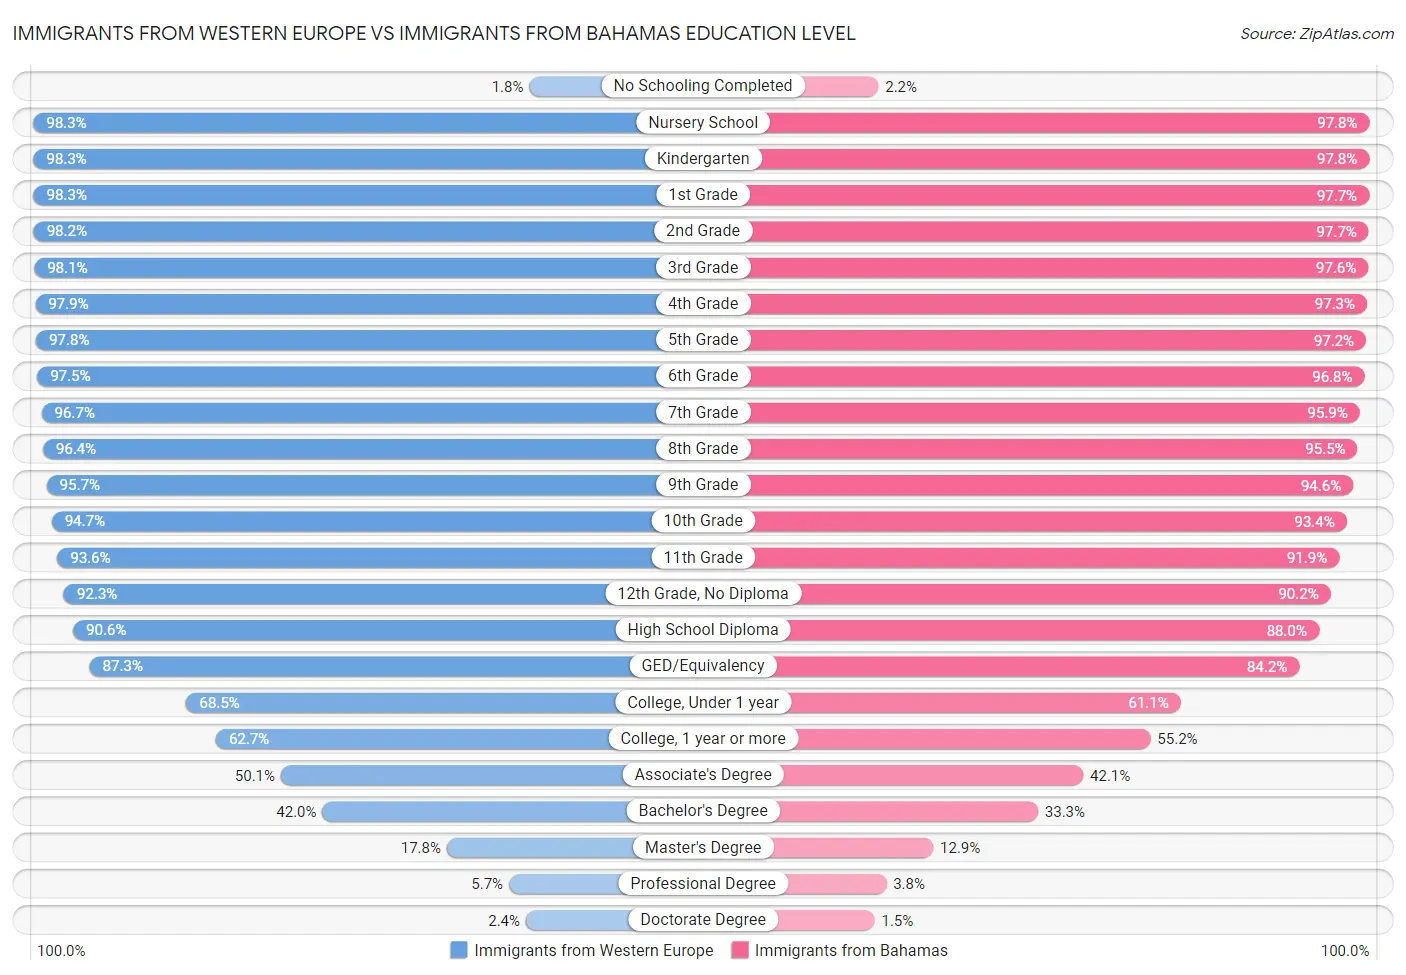 Immigrants from Western Europe vs Immigrants from Bahamas Education Level